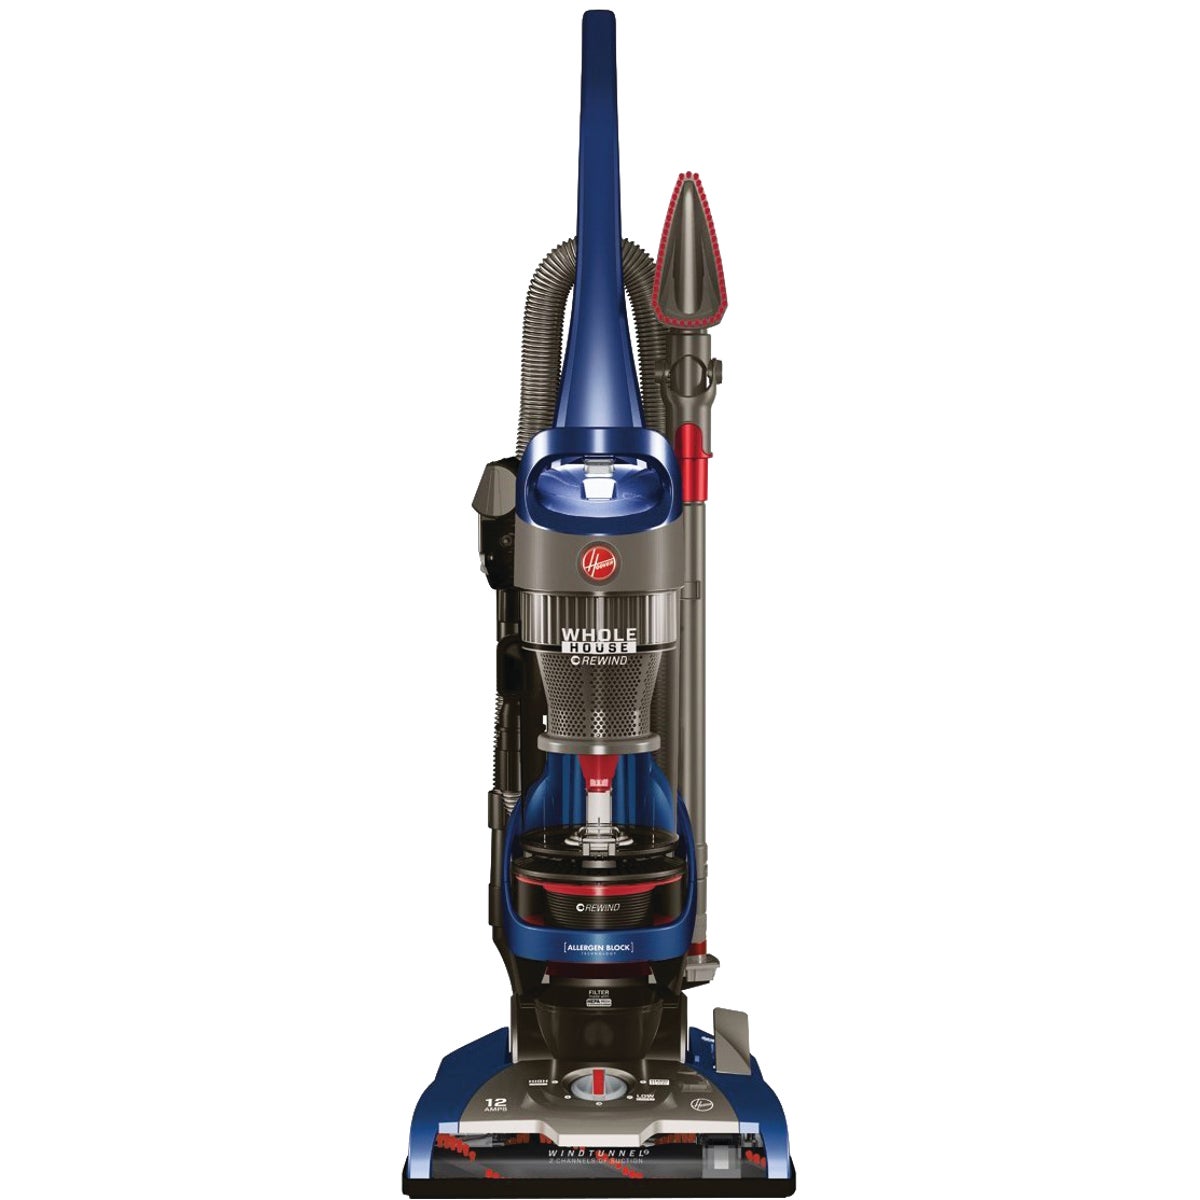 Hoover WindTunnel 2 Whole House Bagless Rewind Upright Vacuum Cleaner